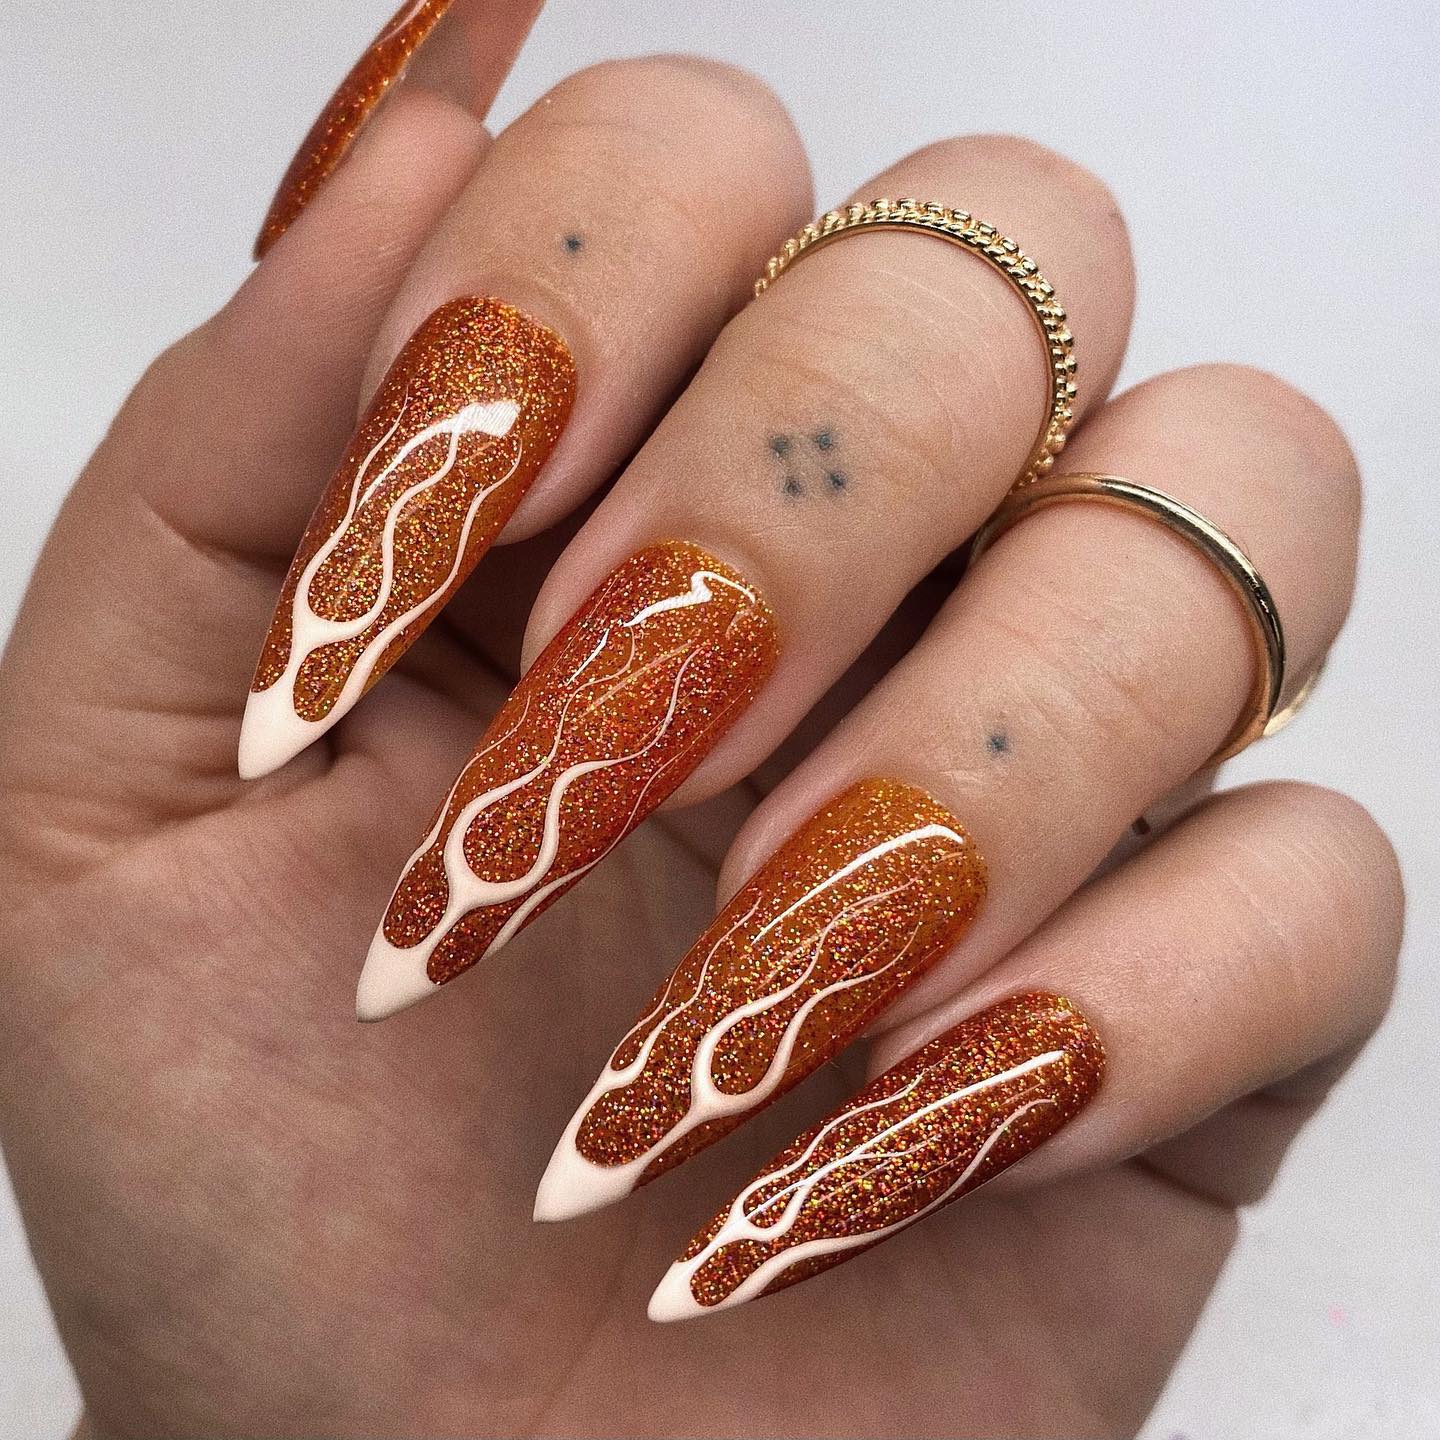 We can count these nails as Halloween nails because they are orange. Long stiletto mani is super daring with its white thin flames and it is sure to show your boldness.